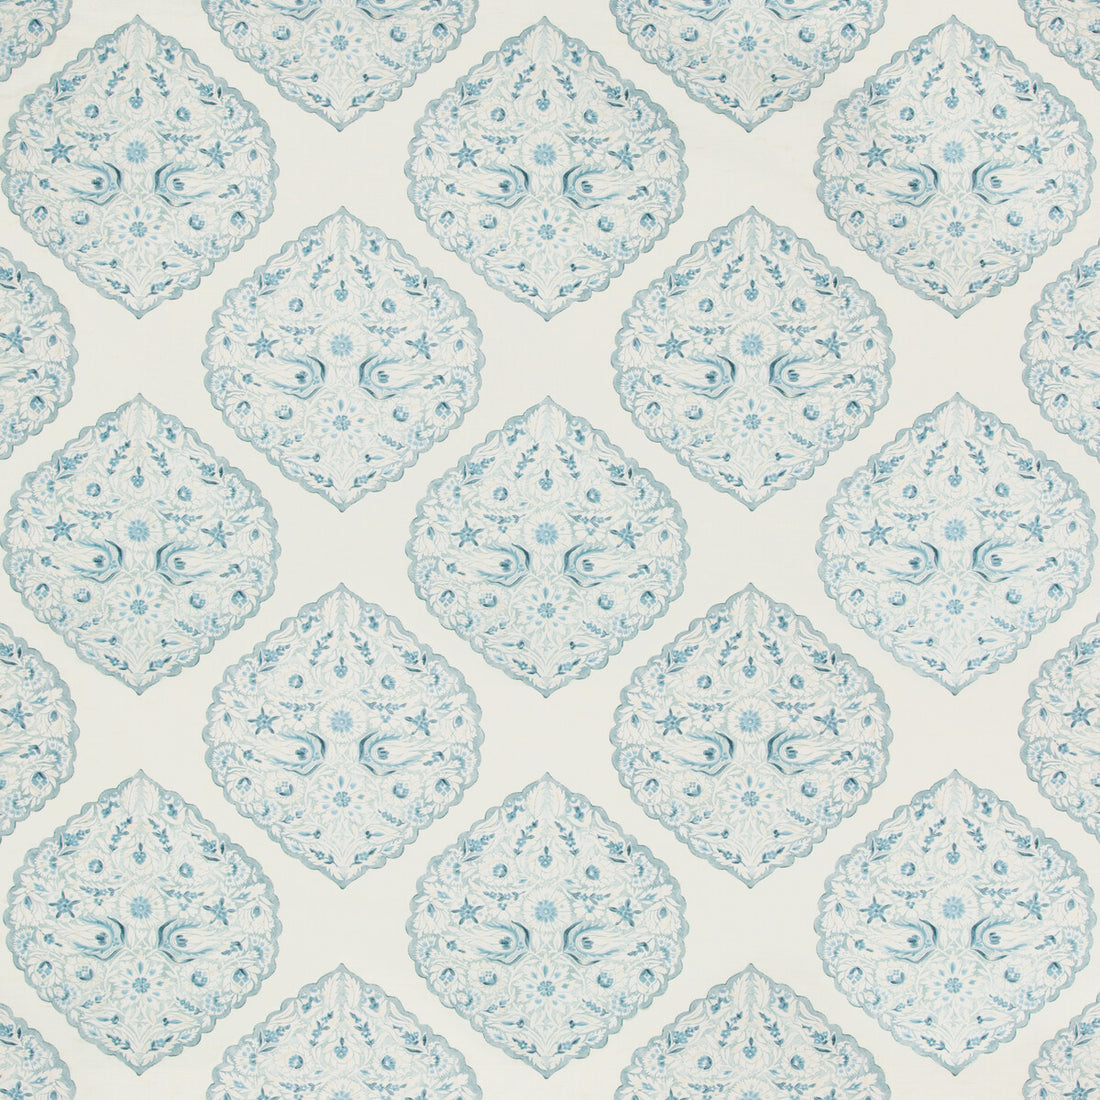 Lido Print fabric in sky color - pattern 2017165.5.0 - by Lee Jofa in the Westport collection